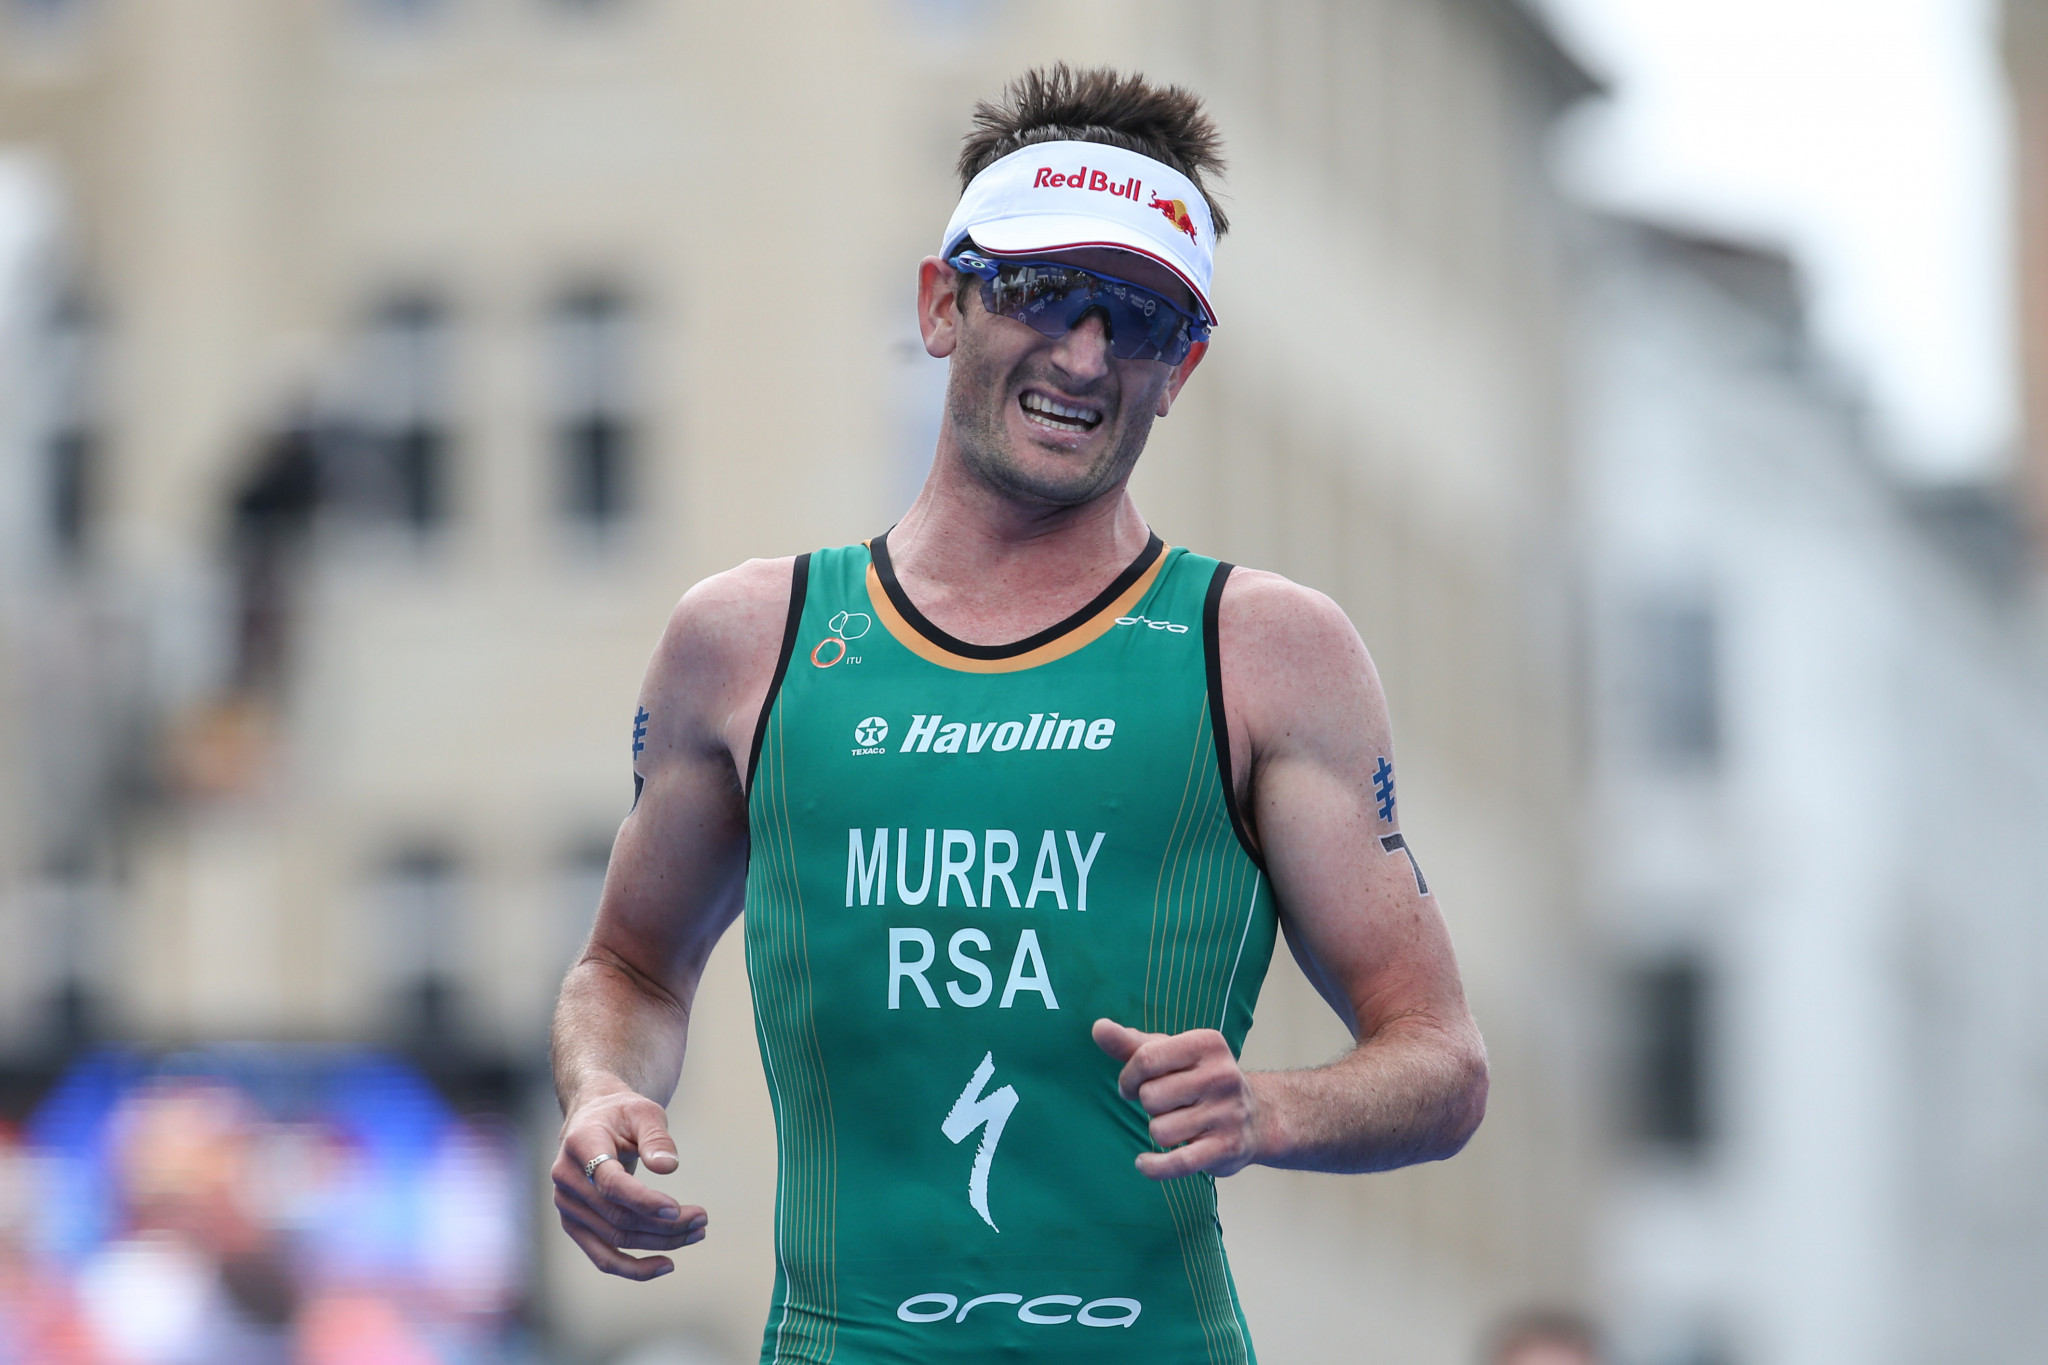 South Africa's Richard Murray is top-ranked for the ITU World Cup that starts in Madrid tomorrow ©Getty Images